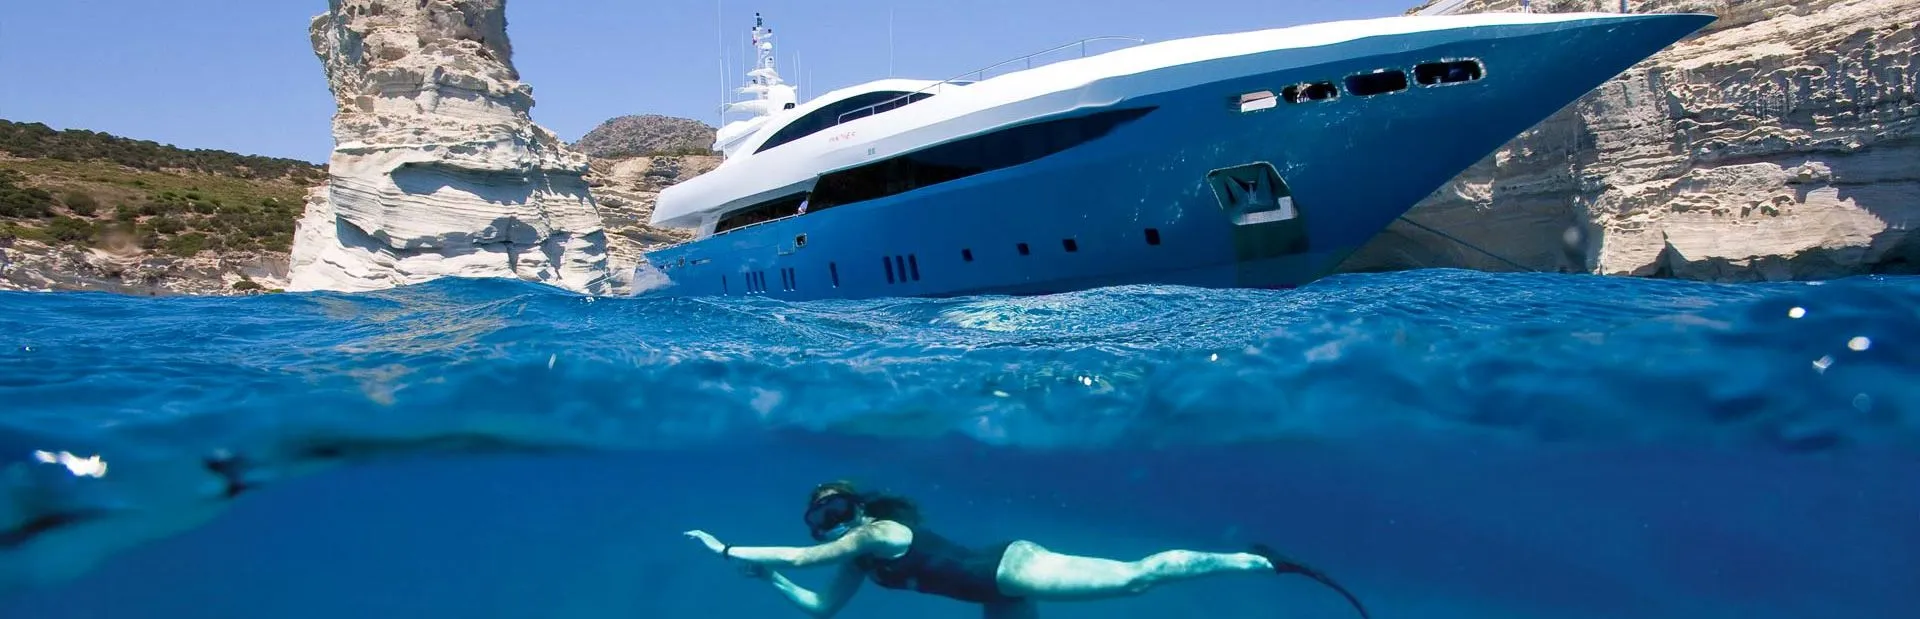 person underwater snorkeling and superyacht